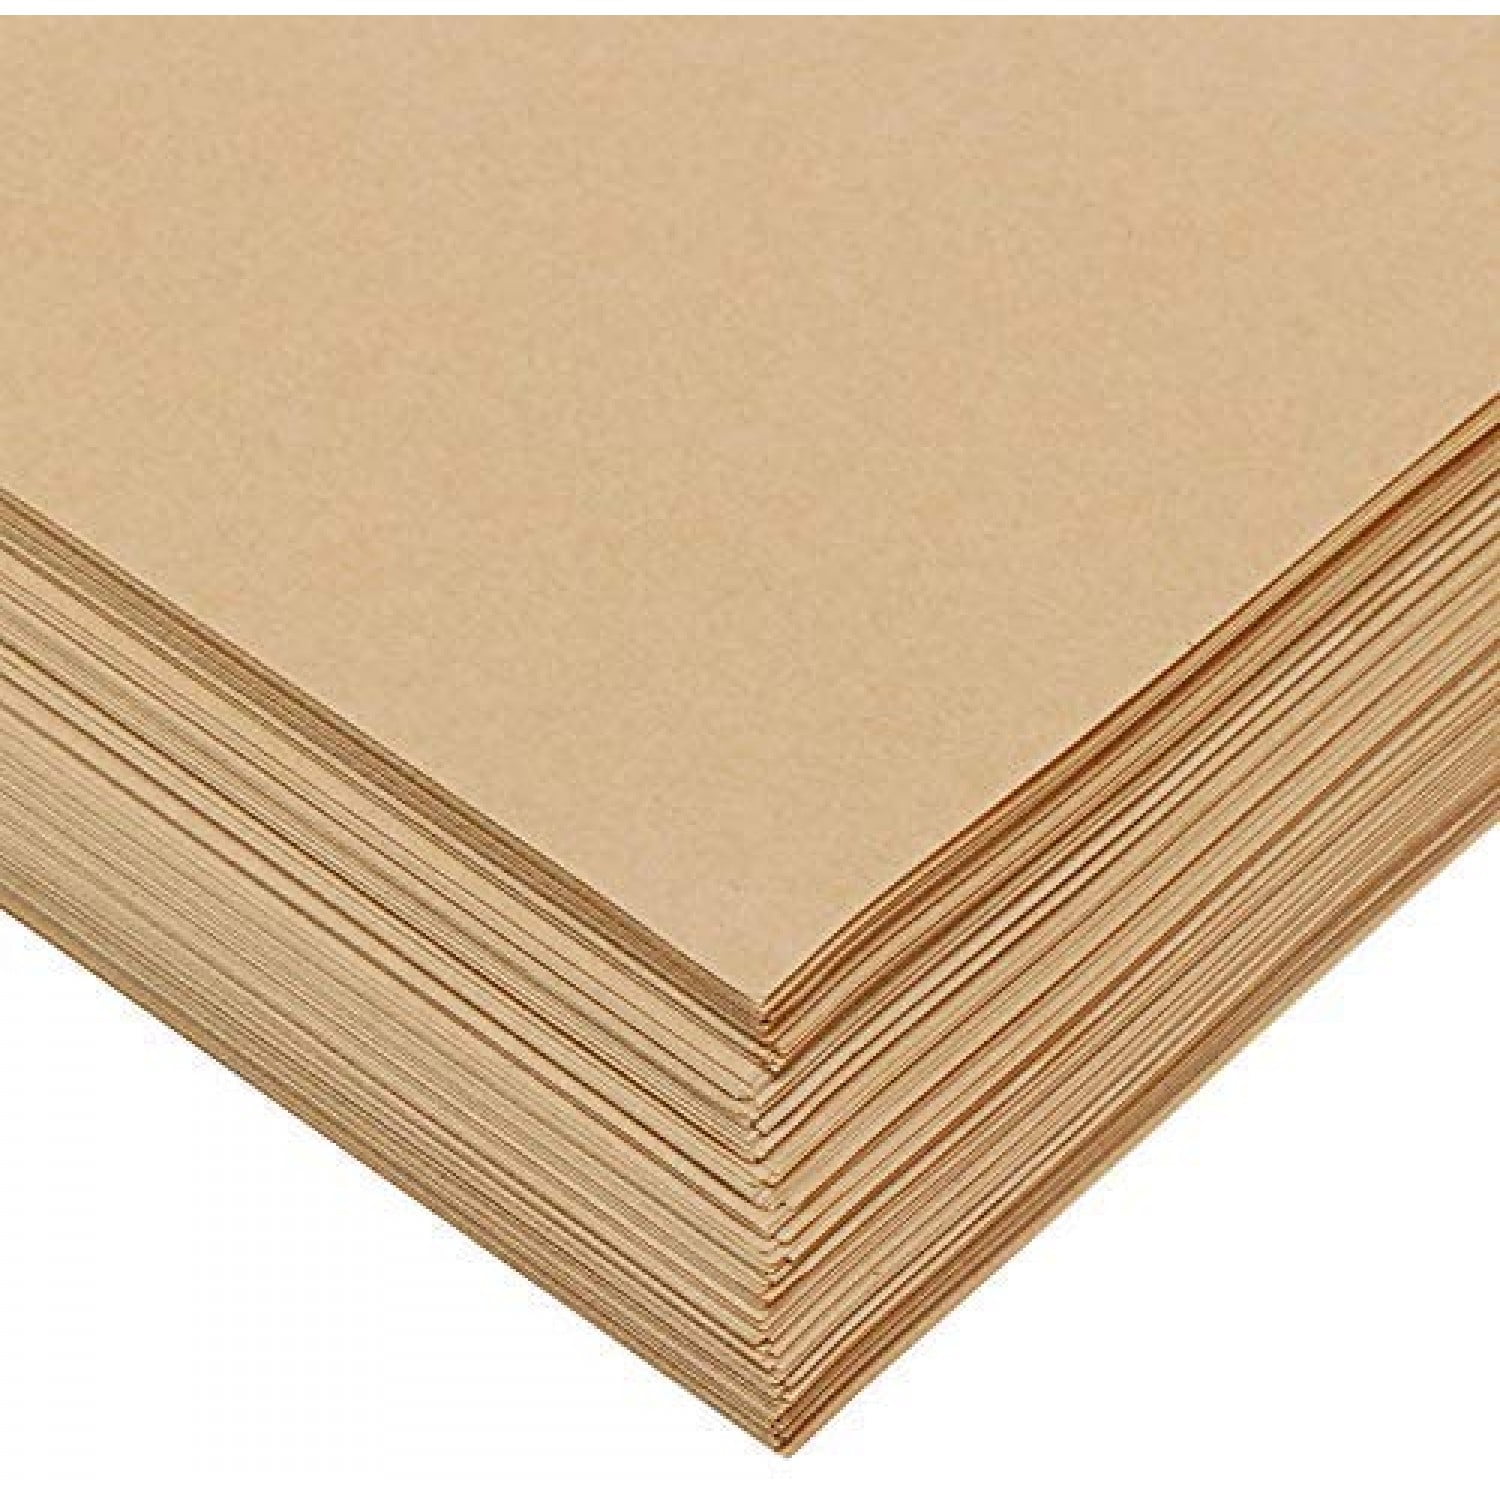 McNairn Packaging 105504 Deli Paper Wrap-Up Sheets 12 x 10.75 6000 / Case